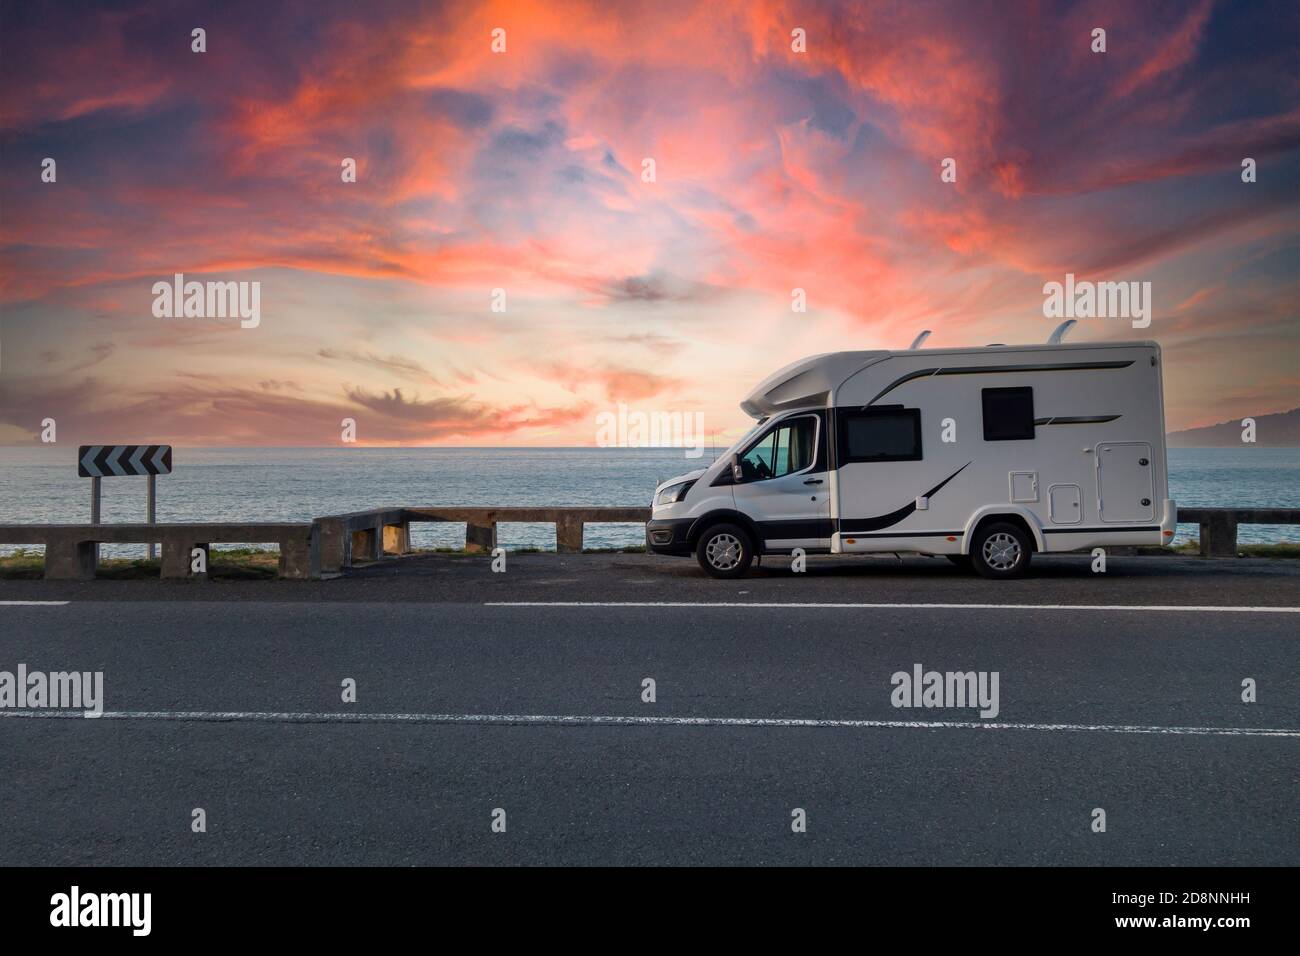 Caravan parked next to the sea at sunset, with dramatic sky Stock Photo